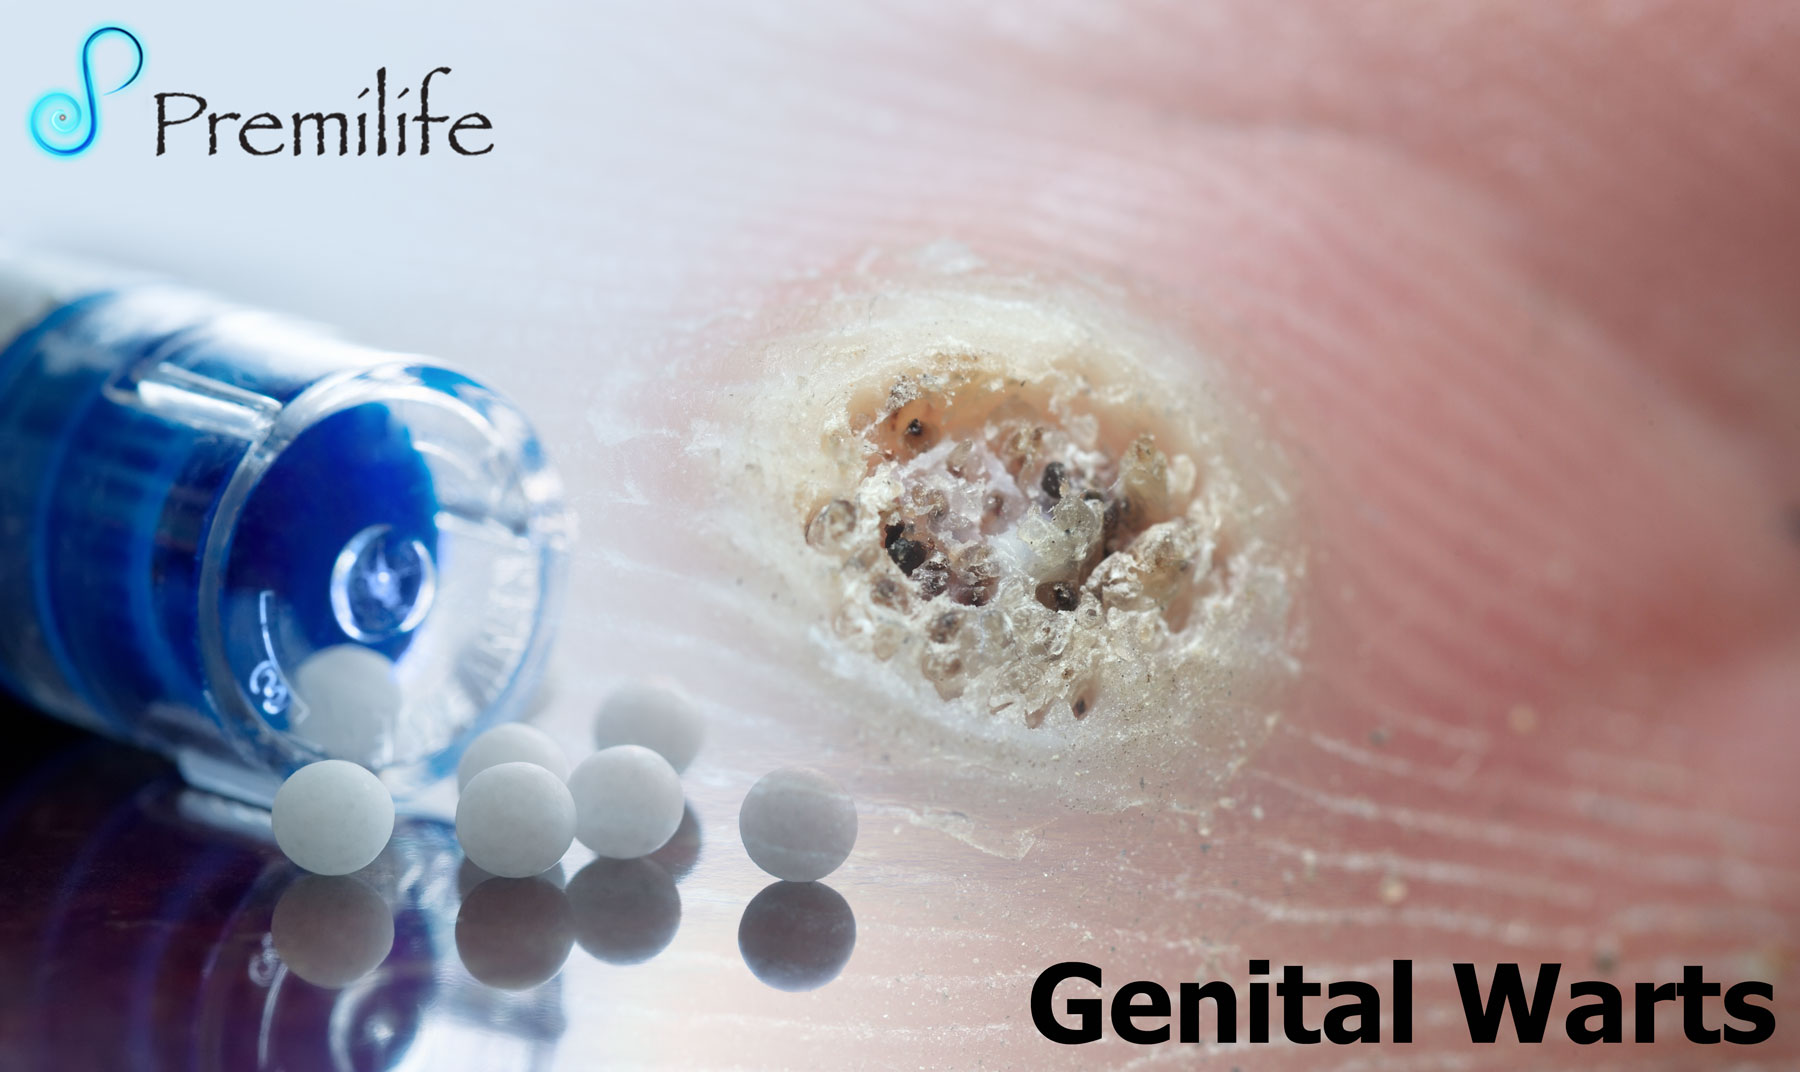 genital warts treatment in homeopathy